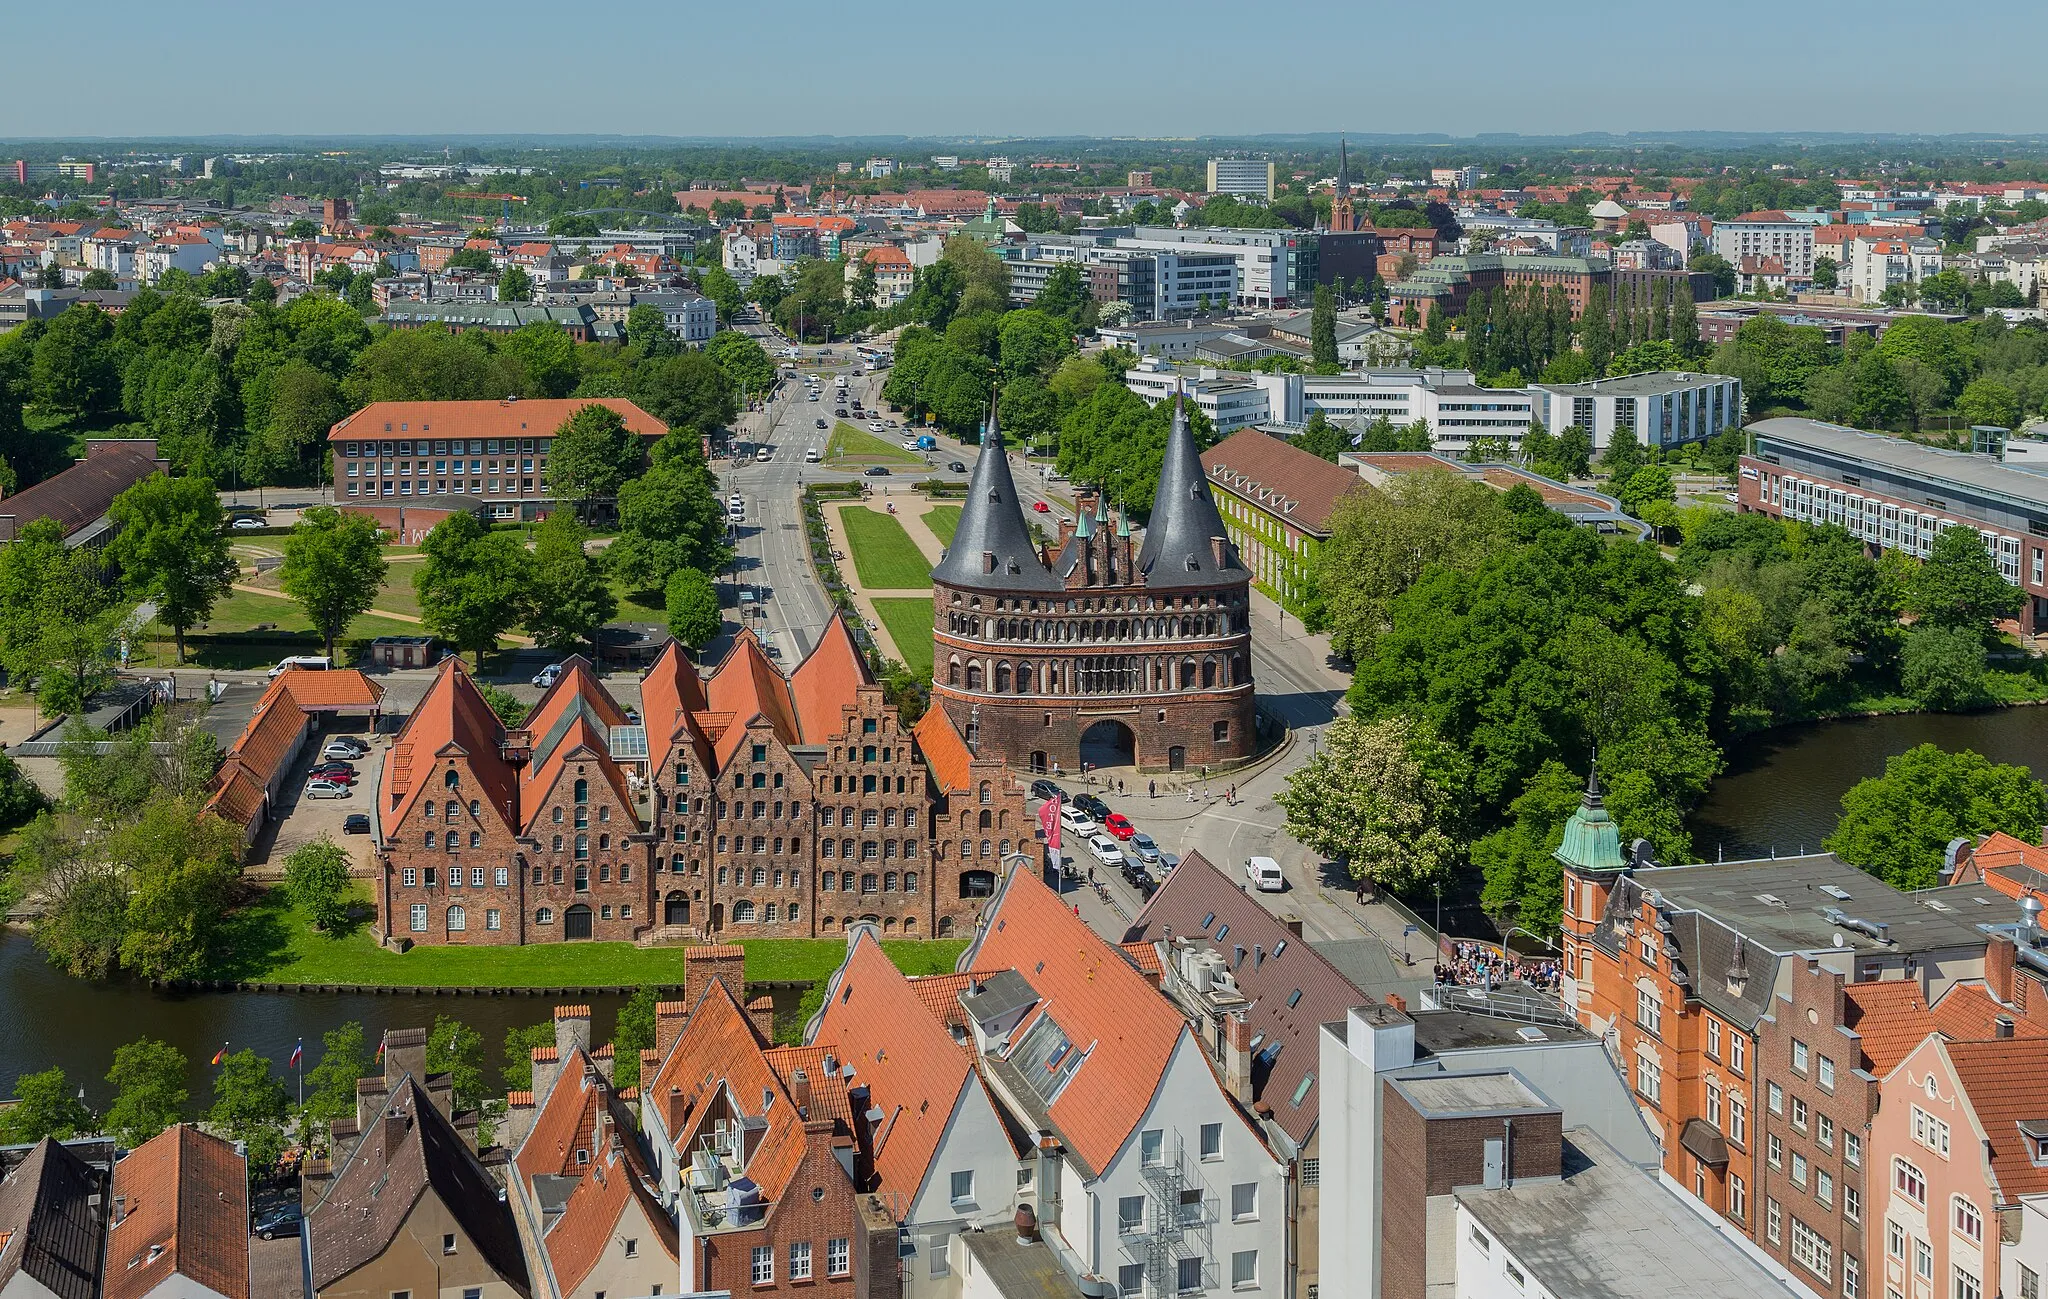 Photo showing: View from the tower of the St. Petri Church over Holsten Gate Square (Holstentorplatz) with the famous Holsten Gate (Holstentor) in the Hanseatic City of Lübeck (Lübeck-Altstadt), Lübeck, Schleswig-Holstein, Germany. The buildings on the left of the gate are the Lübeck Salt Storages (Lübecker Salzspeicher).